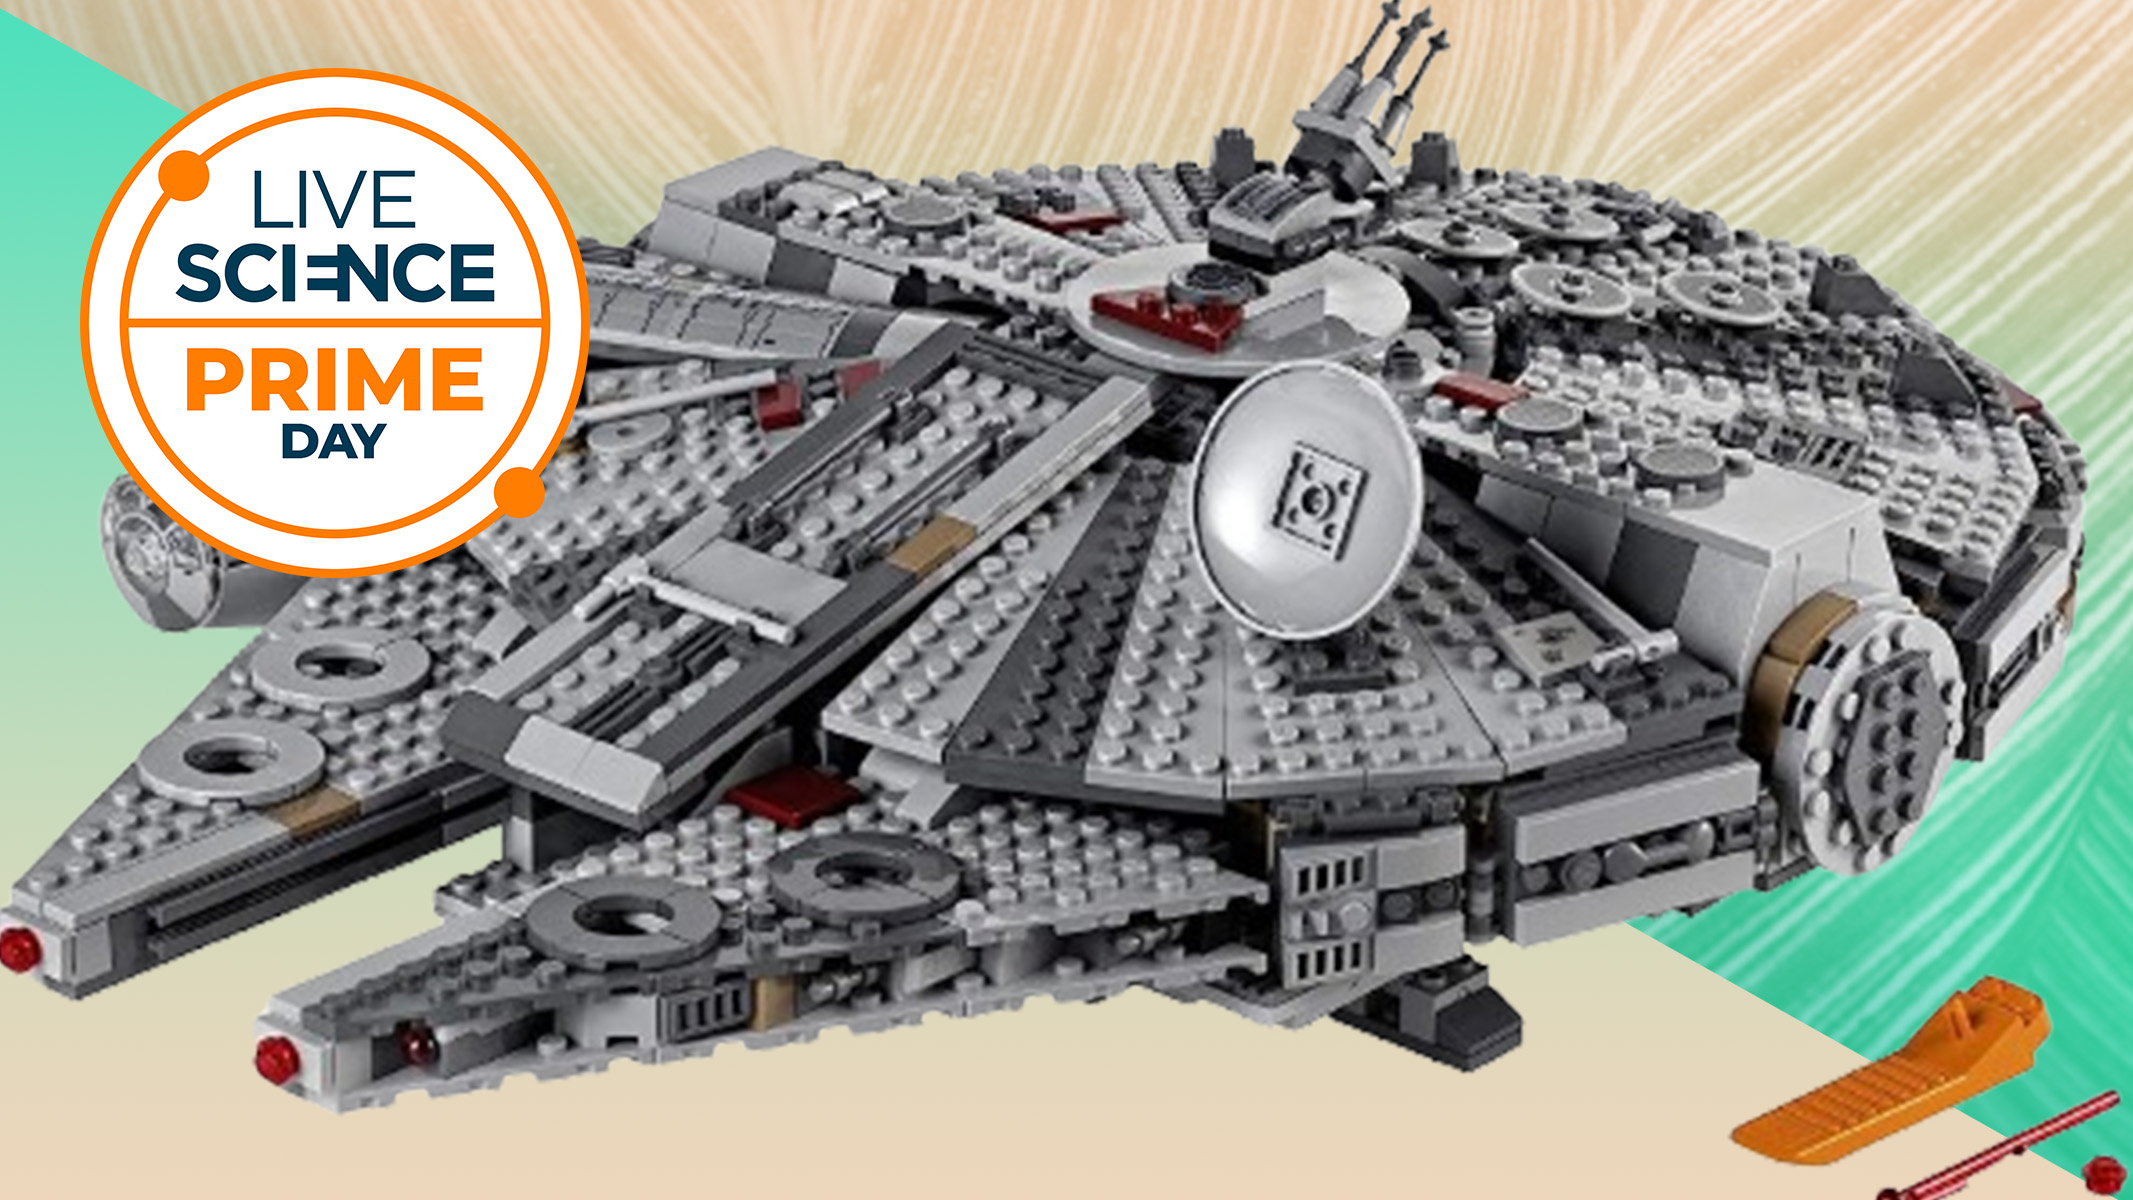  Save 20% on the LEGO Star Wars Millennium Falcon at Amazon 